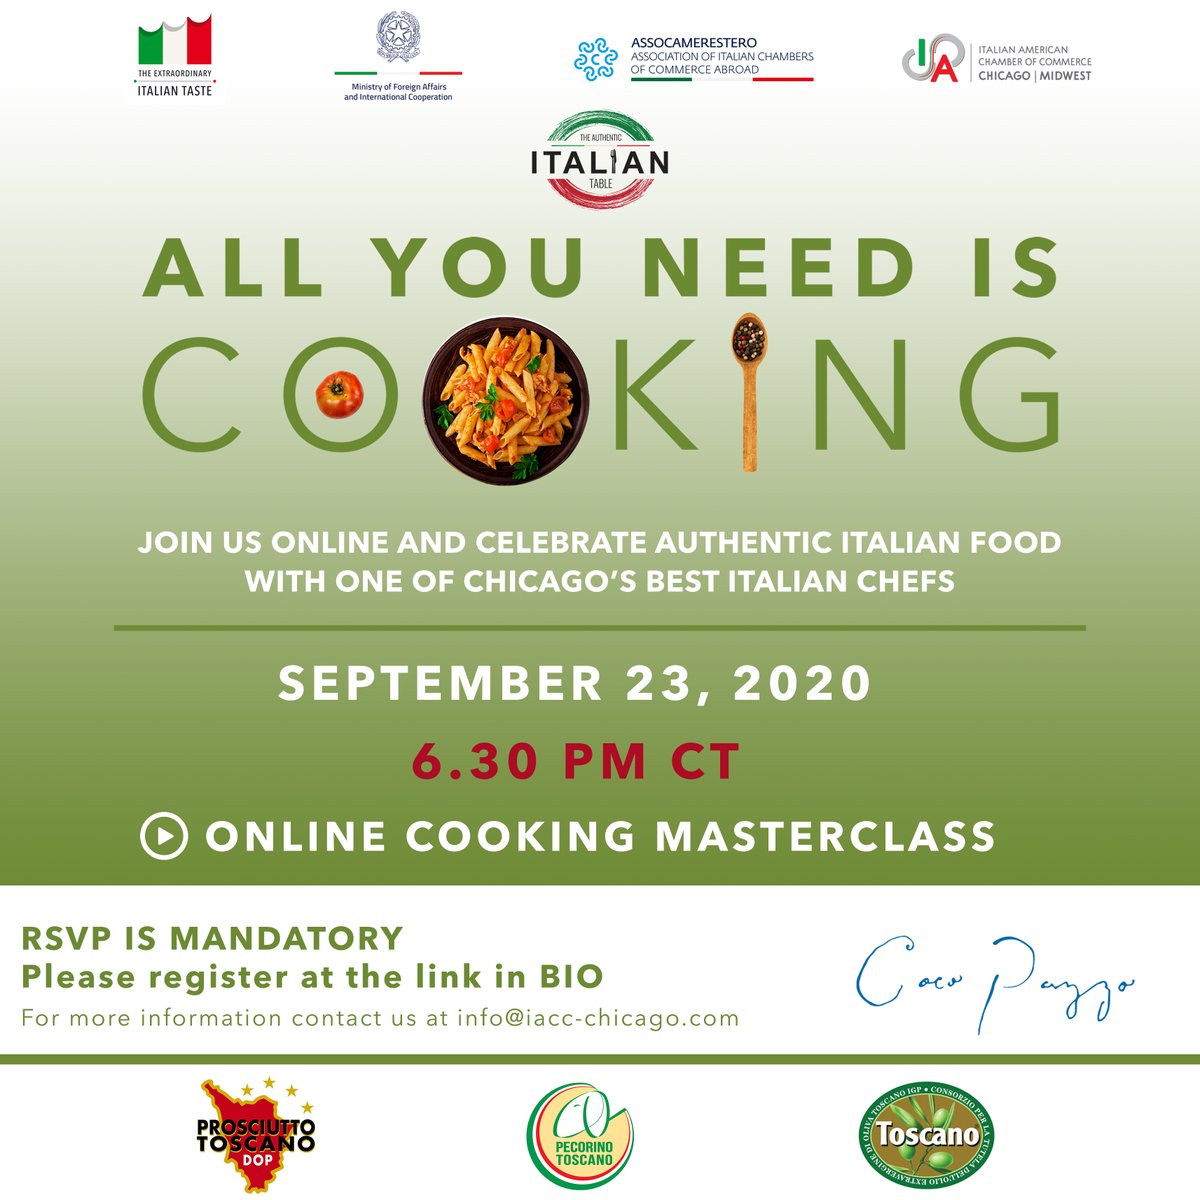 Continue on the journey discovering True Italian flavors with our ONLINE cooking event 'ALL YOU NEED IS COOKING' 🇮🇹in collaboration with @TasteTrue @assocamestero and @CocoPazzoChi, info here: bit.ly/2Fdz9z9 #trueitaliantaste #iffoodcouldtalk #ExtraordinaryItalianTaste